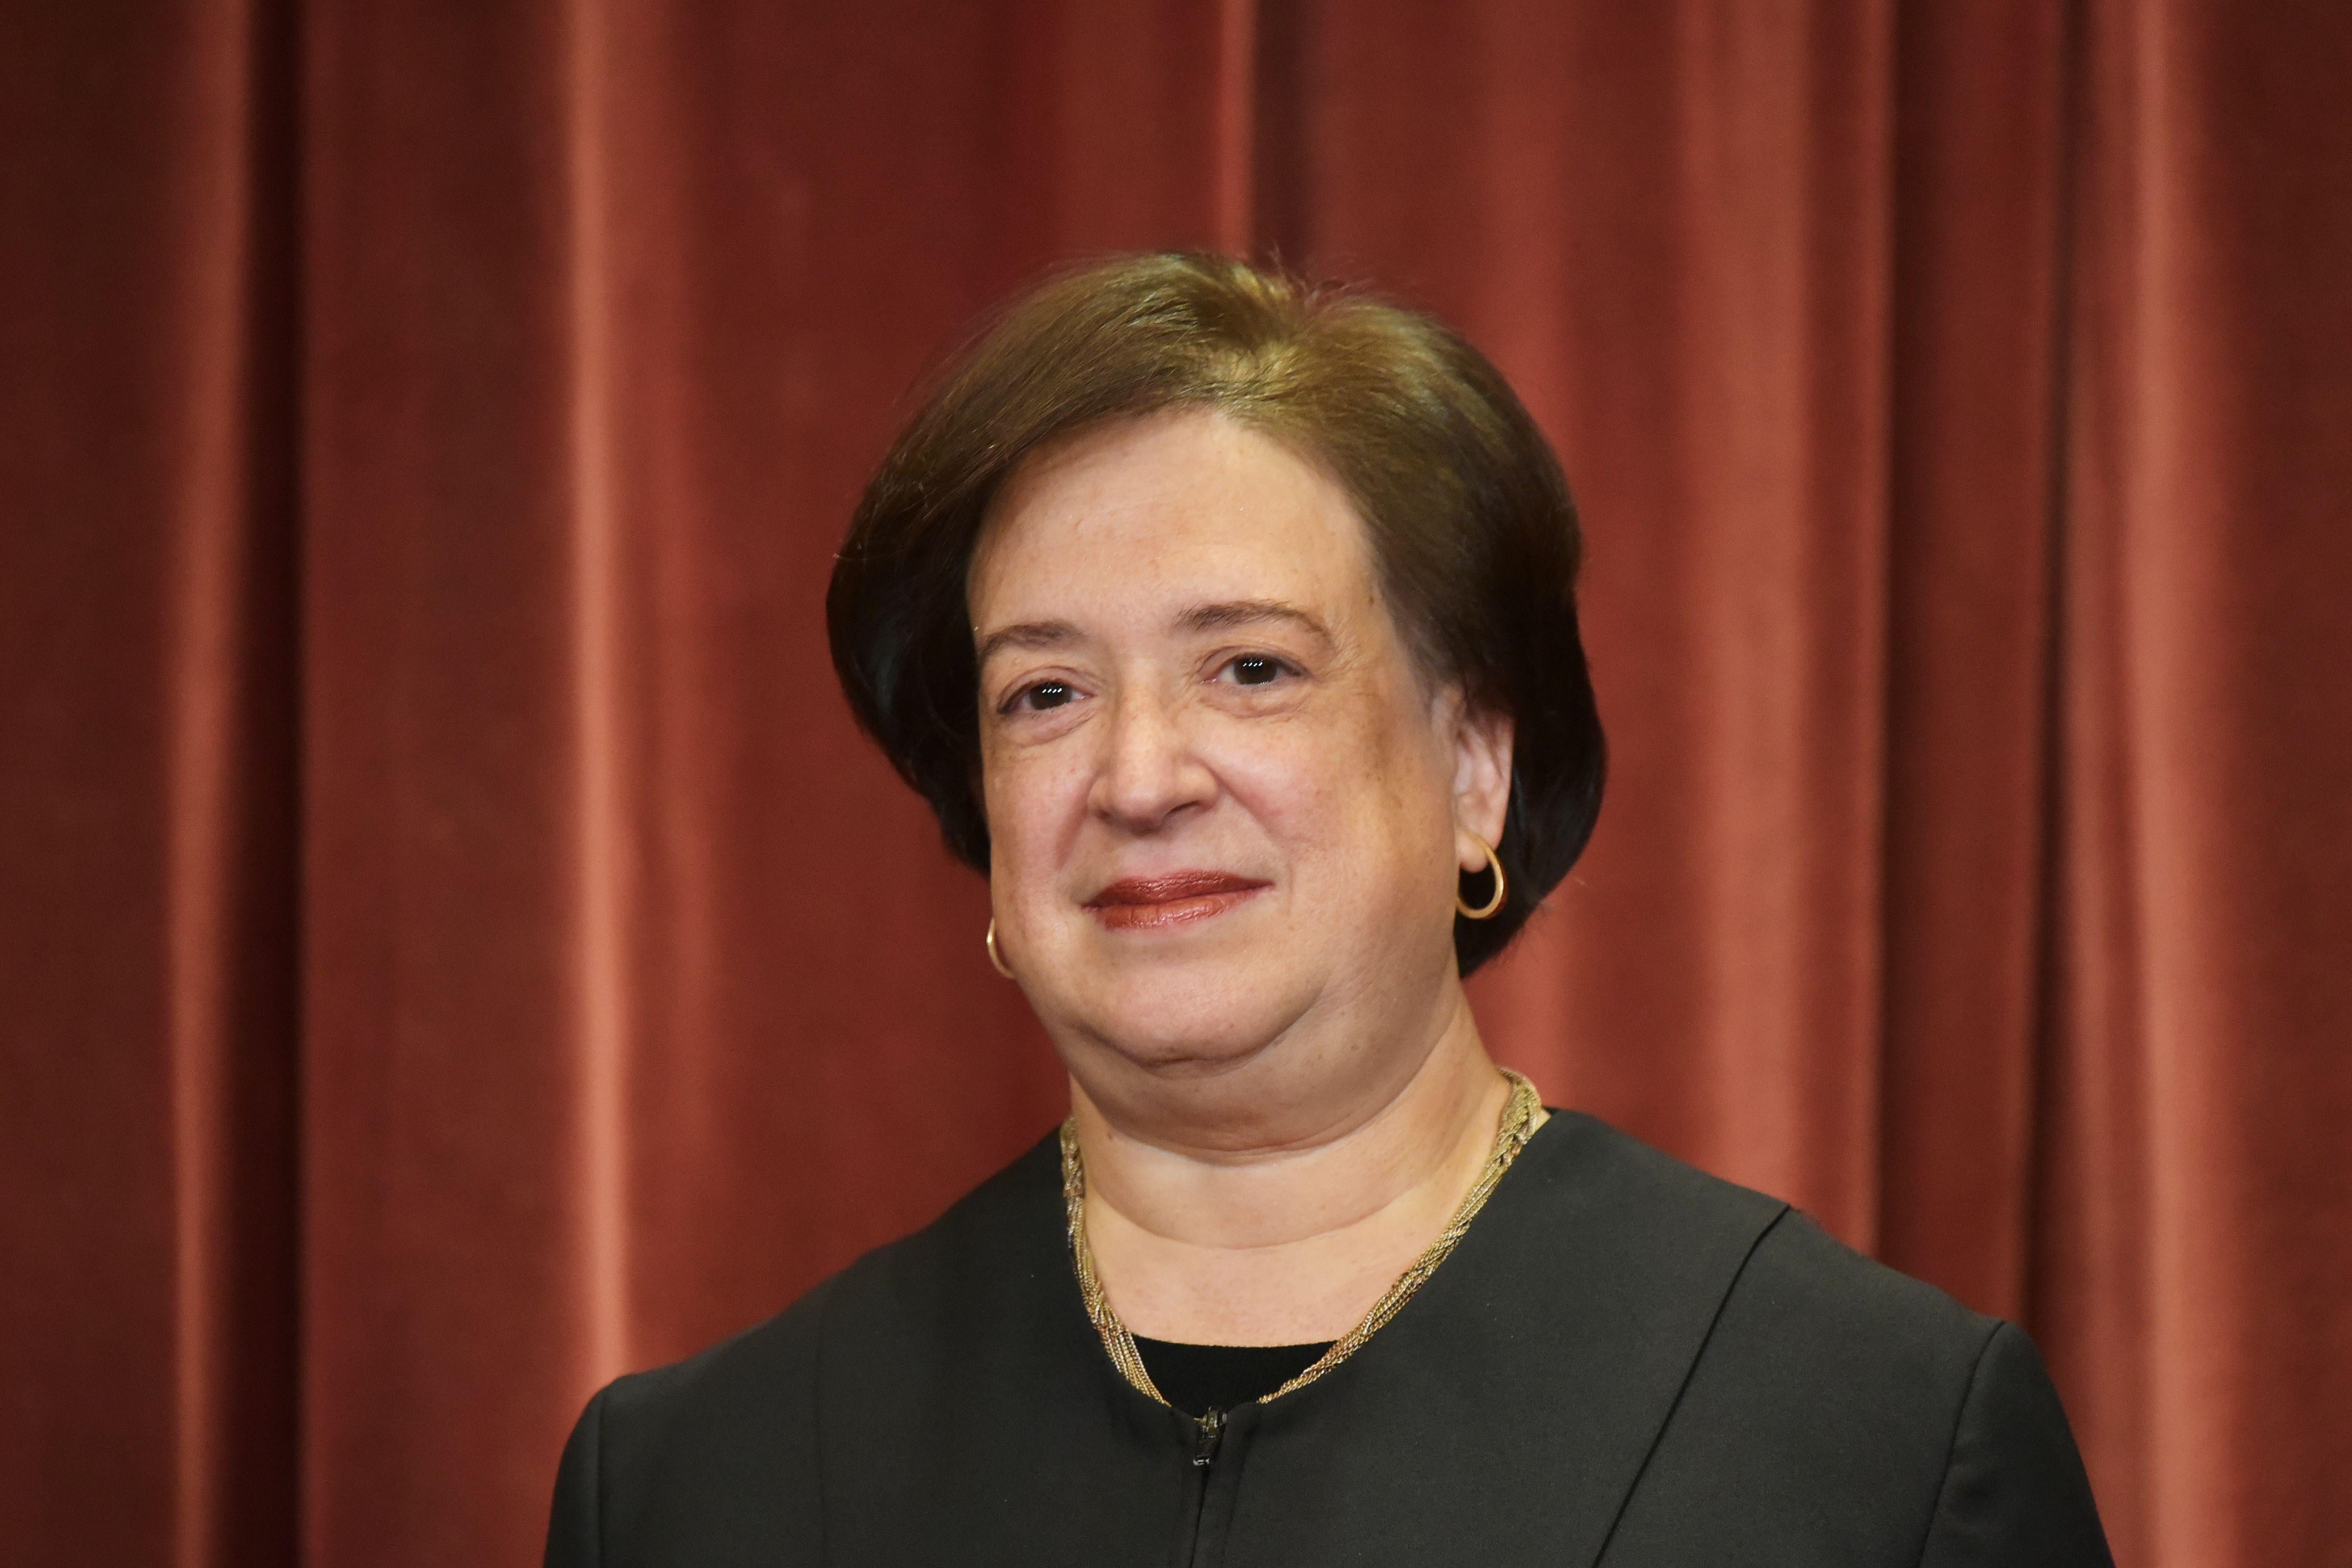 Justice Elena Kagan poses in the official group photo at the Supreme Court building.